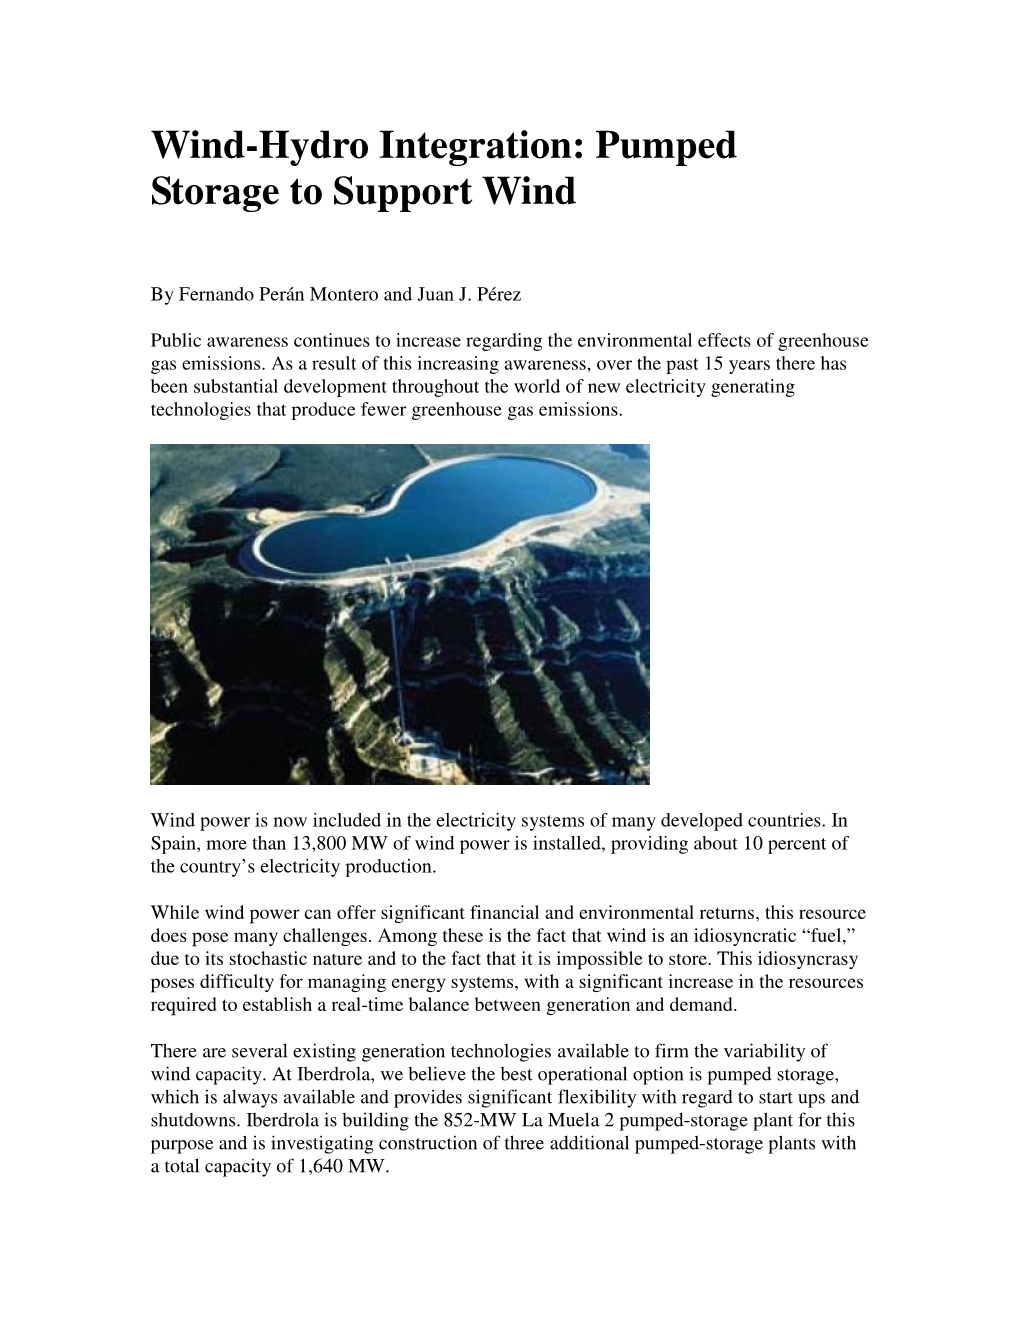 Wind-Hydro Integration: Pumped Storage to Support Wind